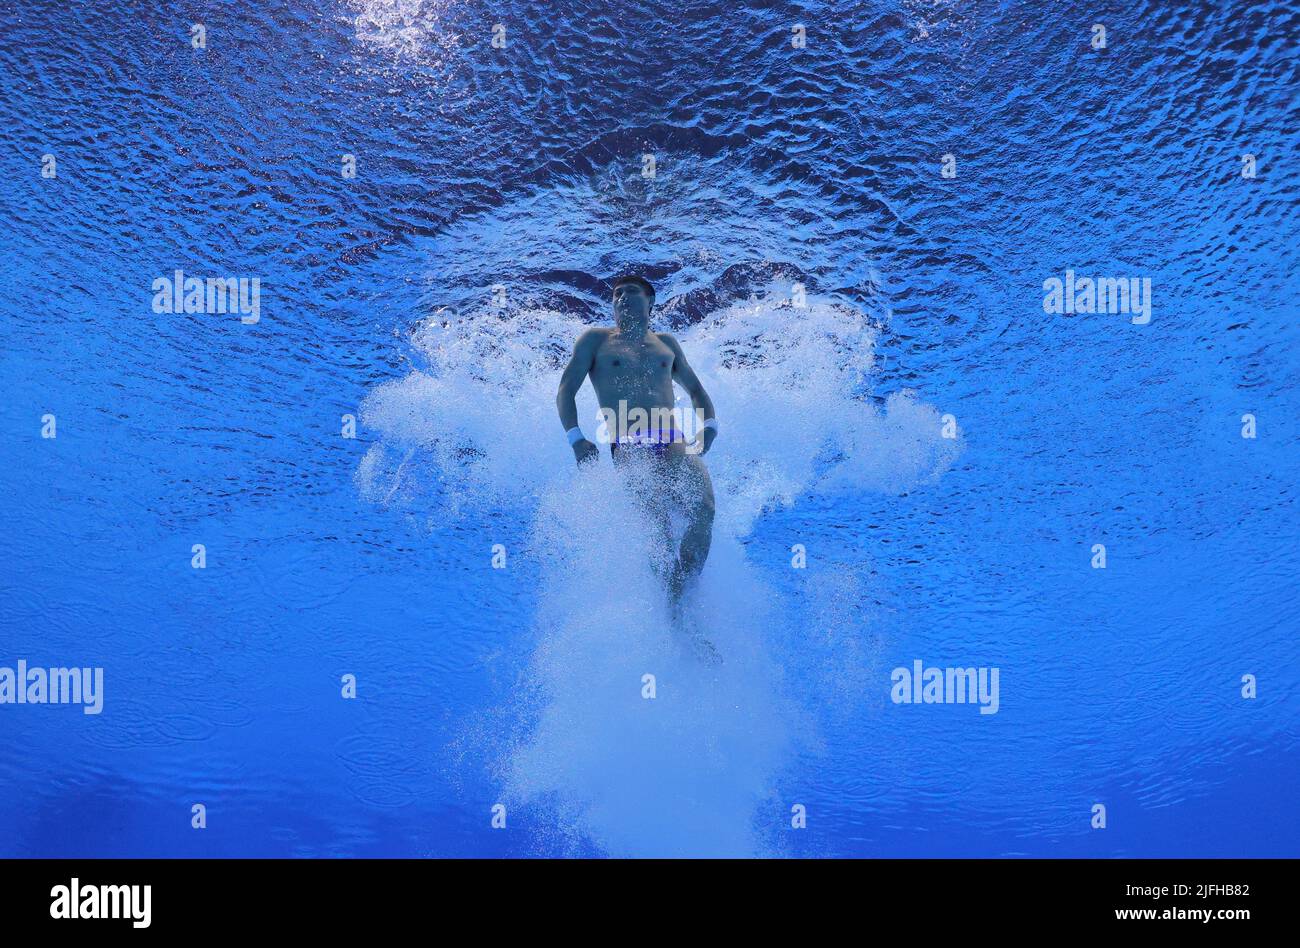 Diving - FINA World Championships - Duna Arena, Budapest, Hungary - July 3, 2022 China's Jian Yang in action during the men's 10m platform final REUTERS/Antonio Bronic Stock Photo